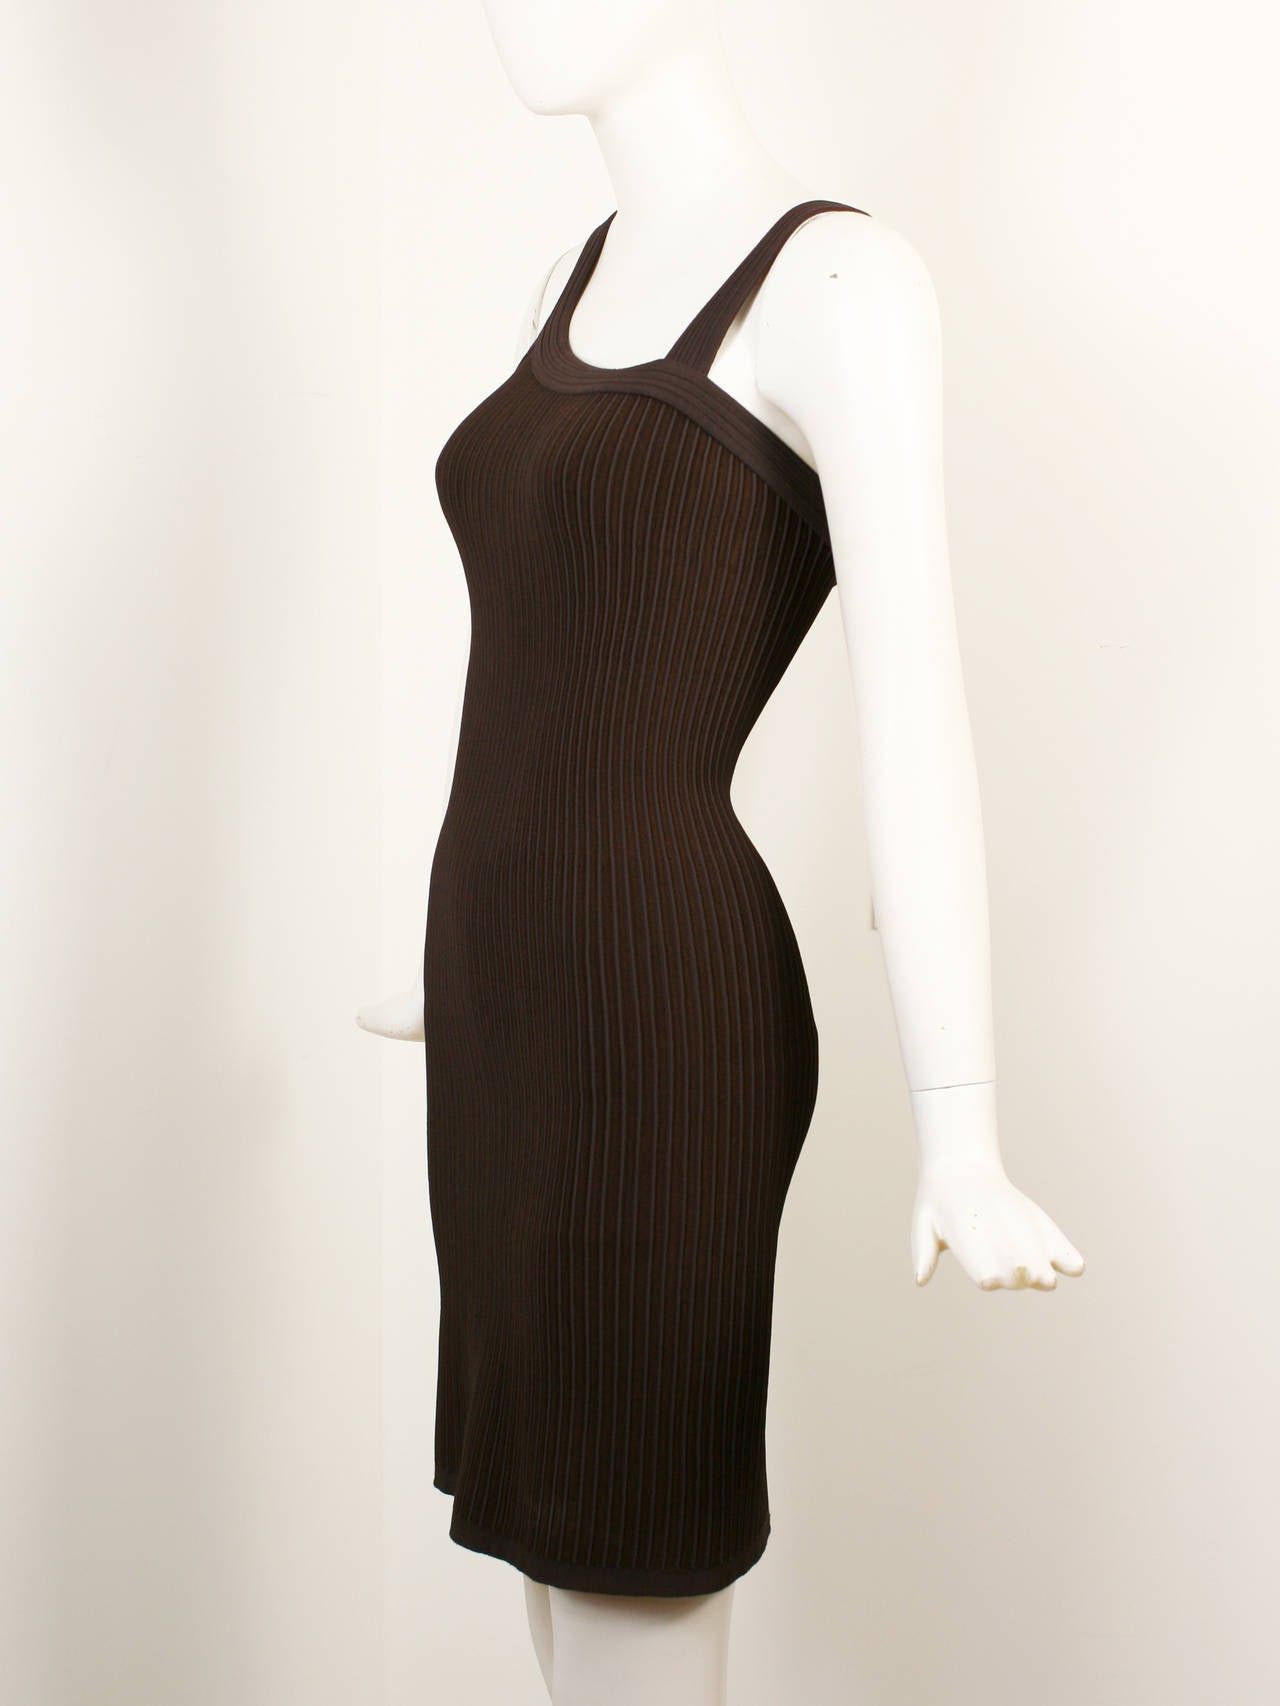 Alaia Sexy Little Dress with Asymmetrical Neckline In Excellent Condition For Sale In New York, NY